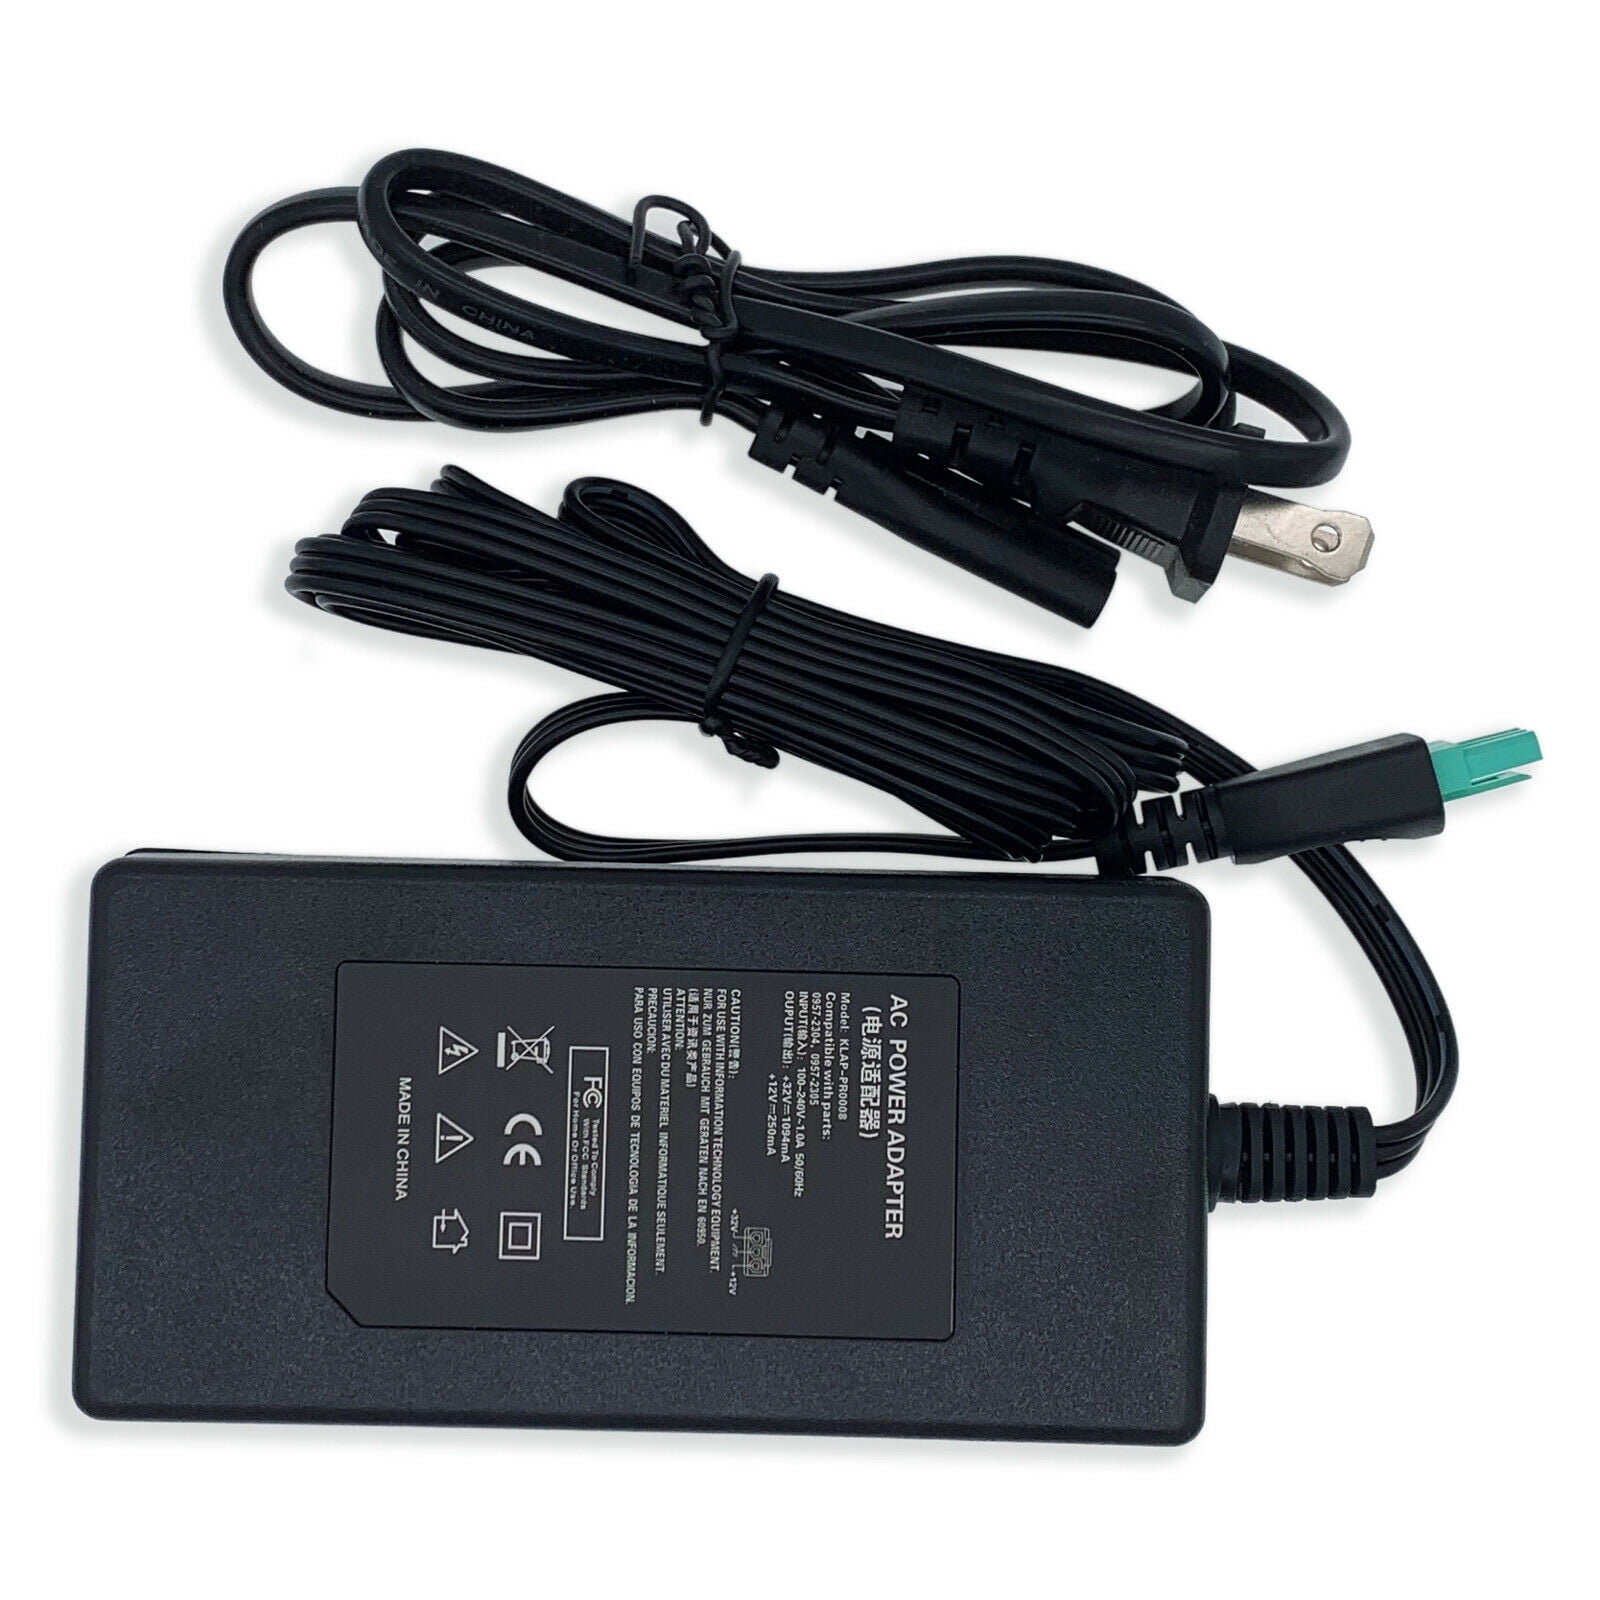 Globalsaving AC Adapter for HP Officejet 7610 Wide Format e-All-in-One Printer Power Supply Cord Cable Charger with 3-Prong e-AIO ePrinter Black Plug